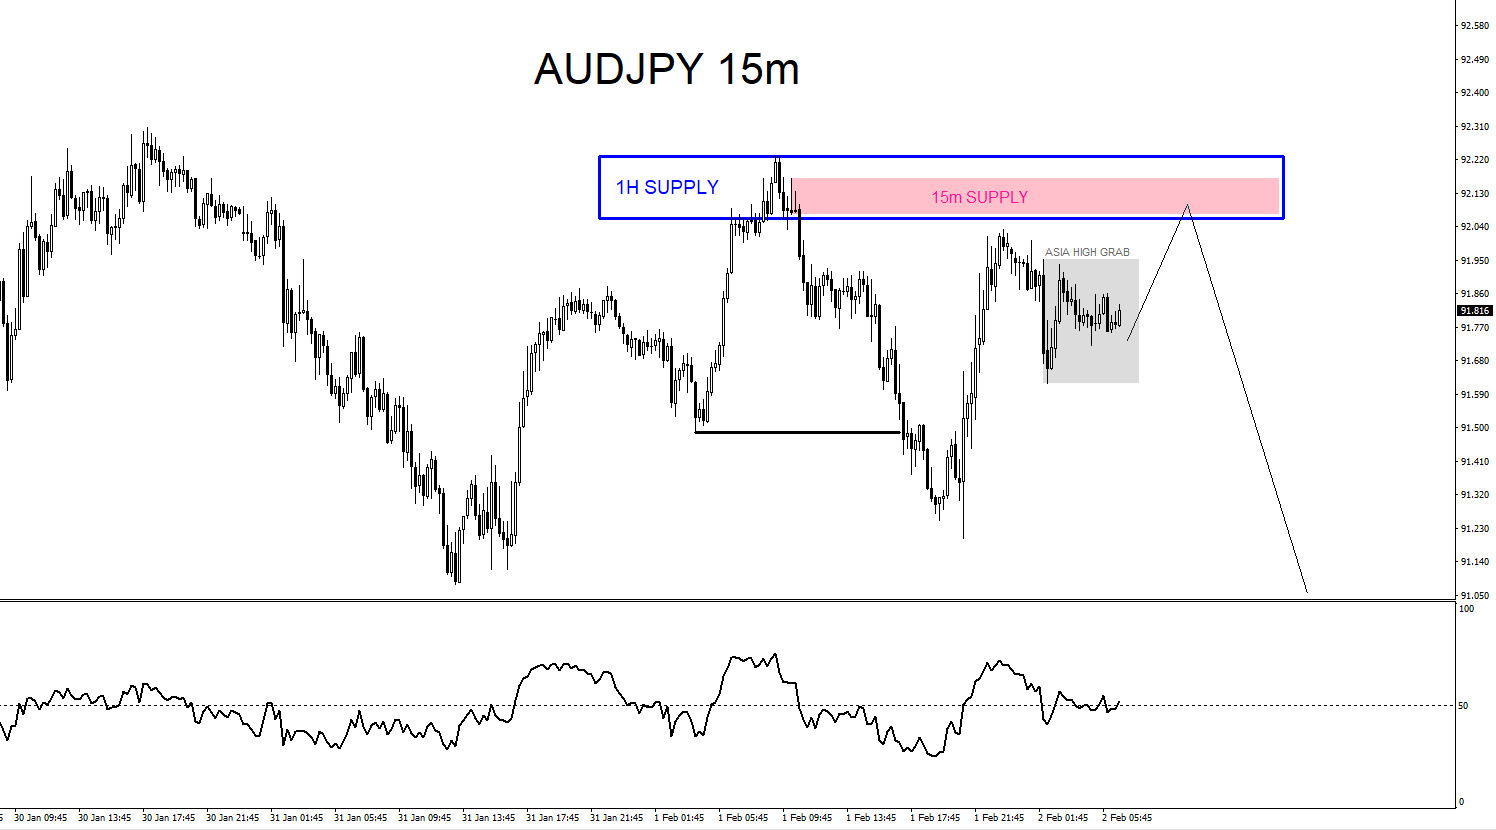 AUDJPY : Catching the Move Lower